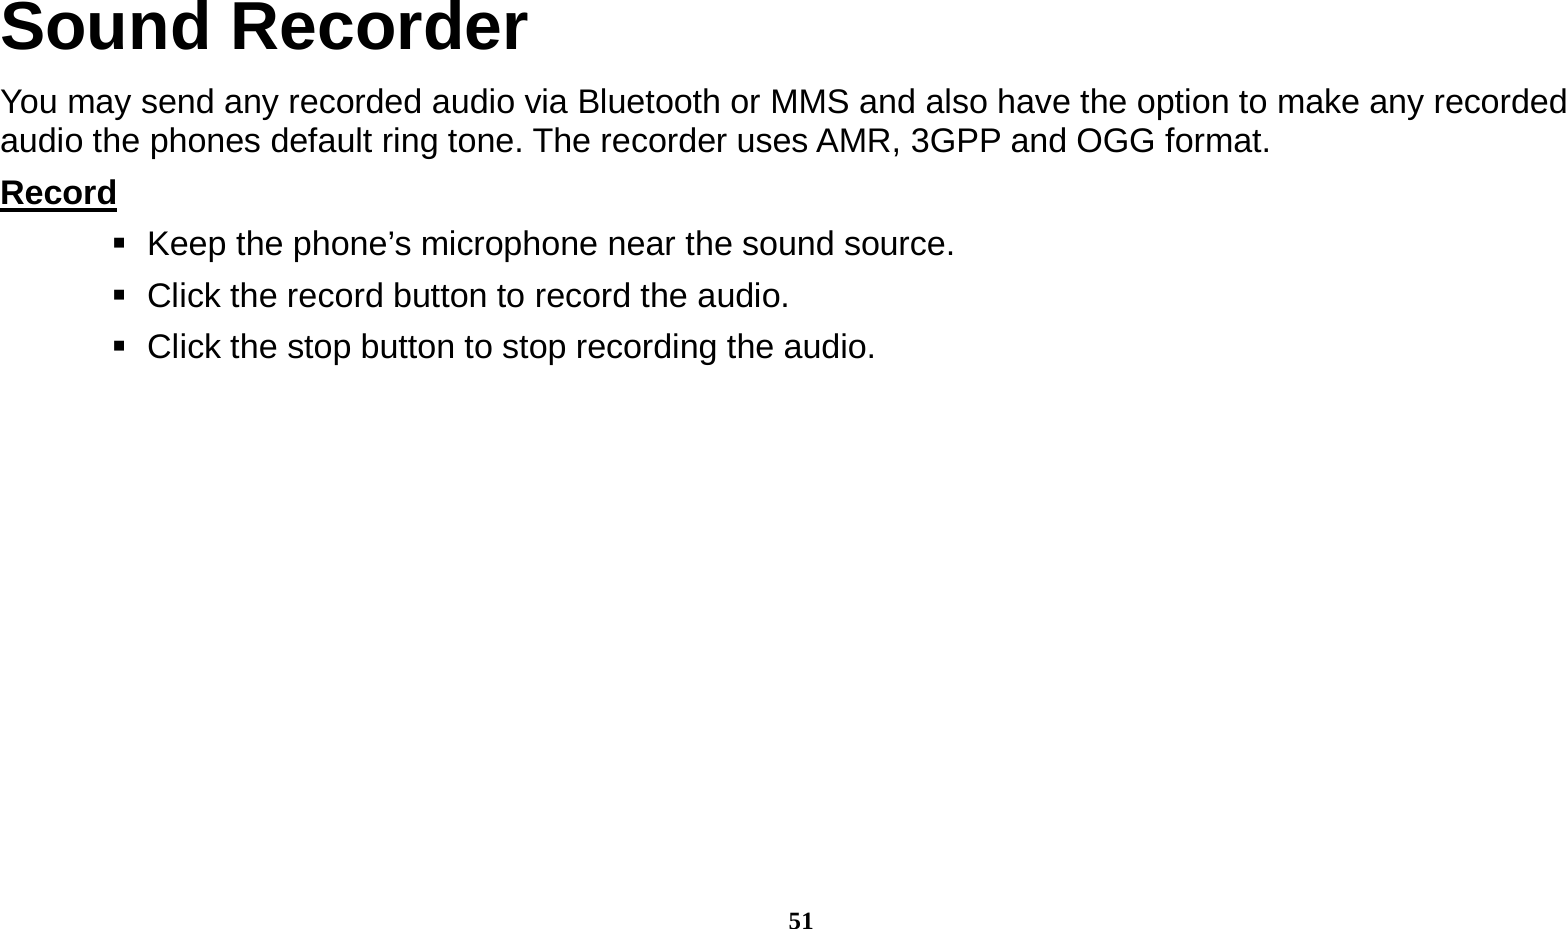  51 Sound Recorder You may send any recorded audio via Bluetooth or MMS and also have the option to make any recorded audio the phones default ring tone. The recorder uses AMR, 3GPP and OGG format. Record                                                                                               Keep the phone’s microphone near the sound source.    Click the record button to record the audio.    Click the stop button to stop recording the audio. 